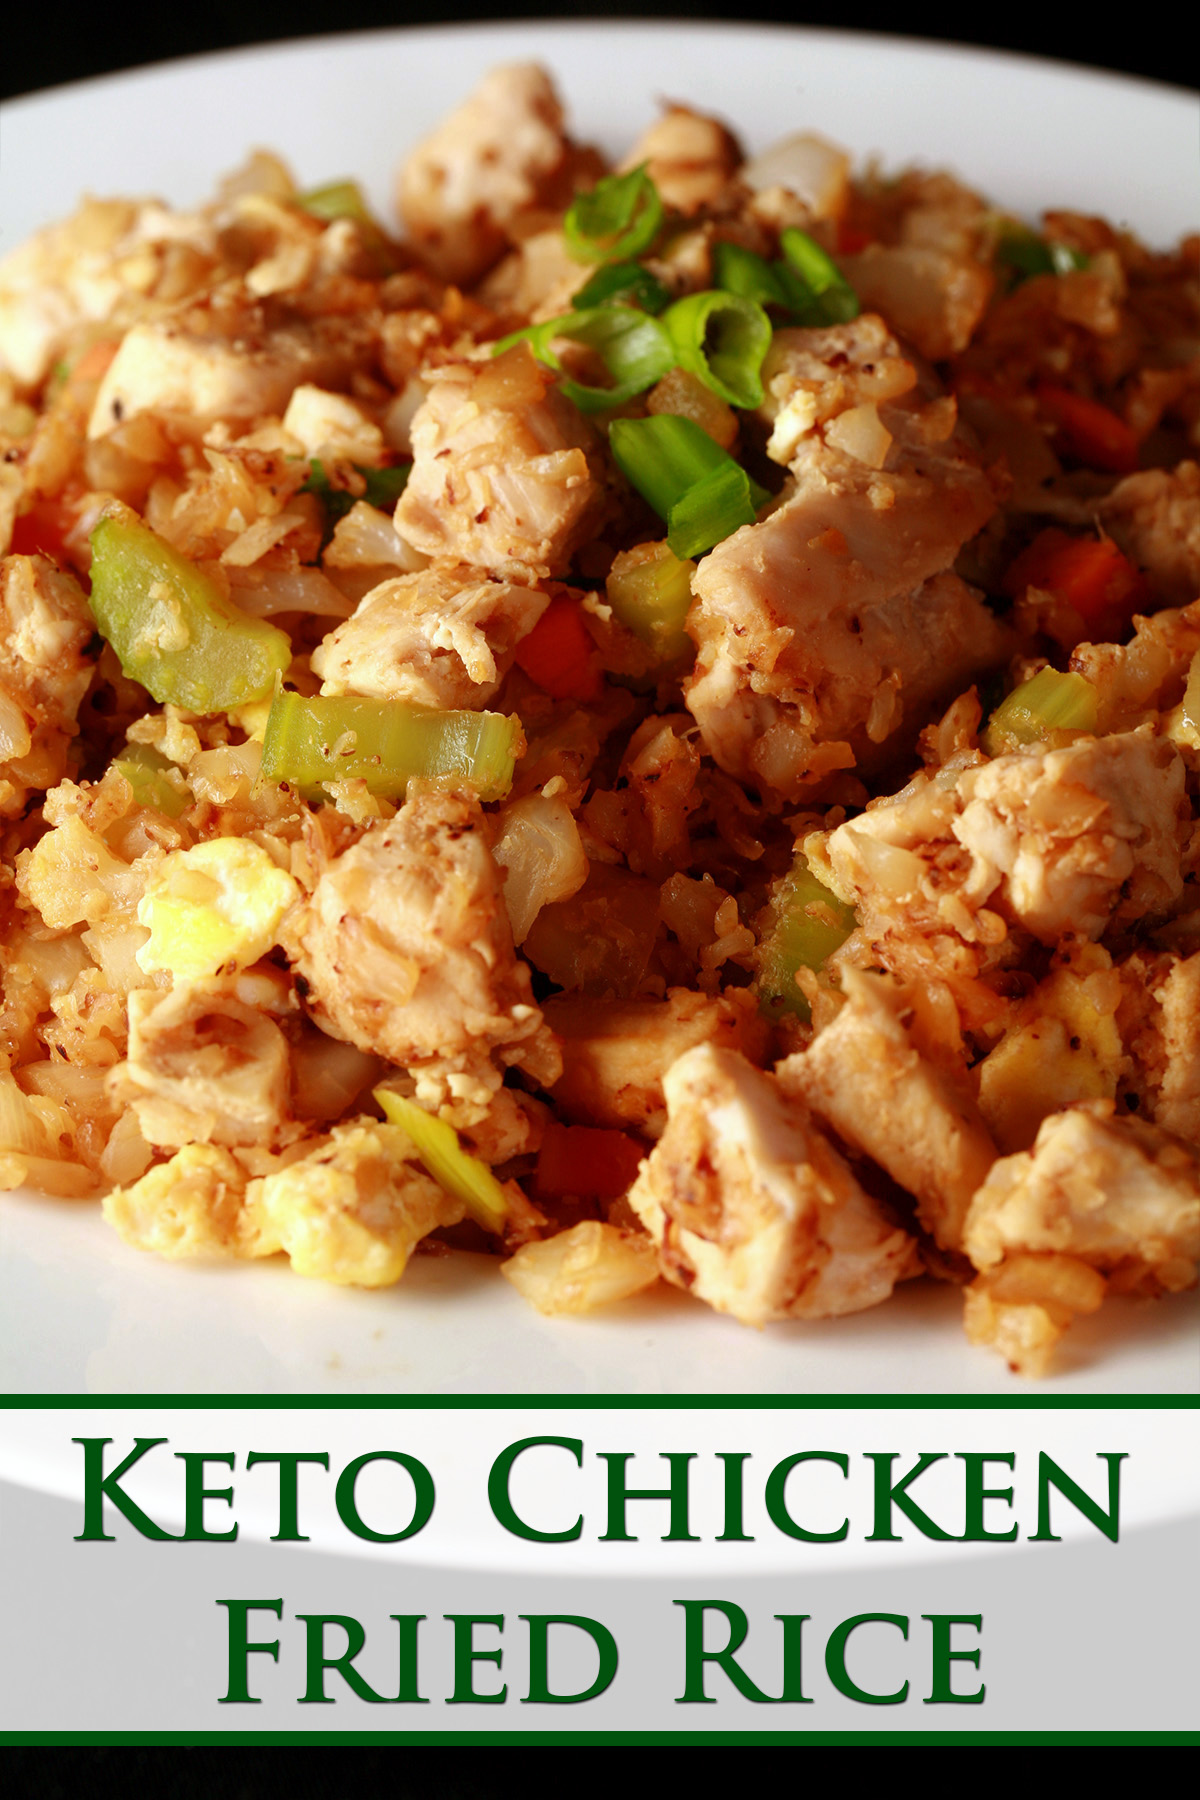 A heaping serving of keto chicken fried rice, in a white bowl.